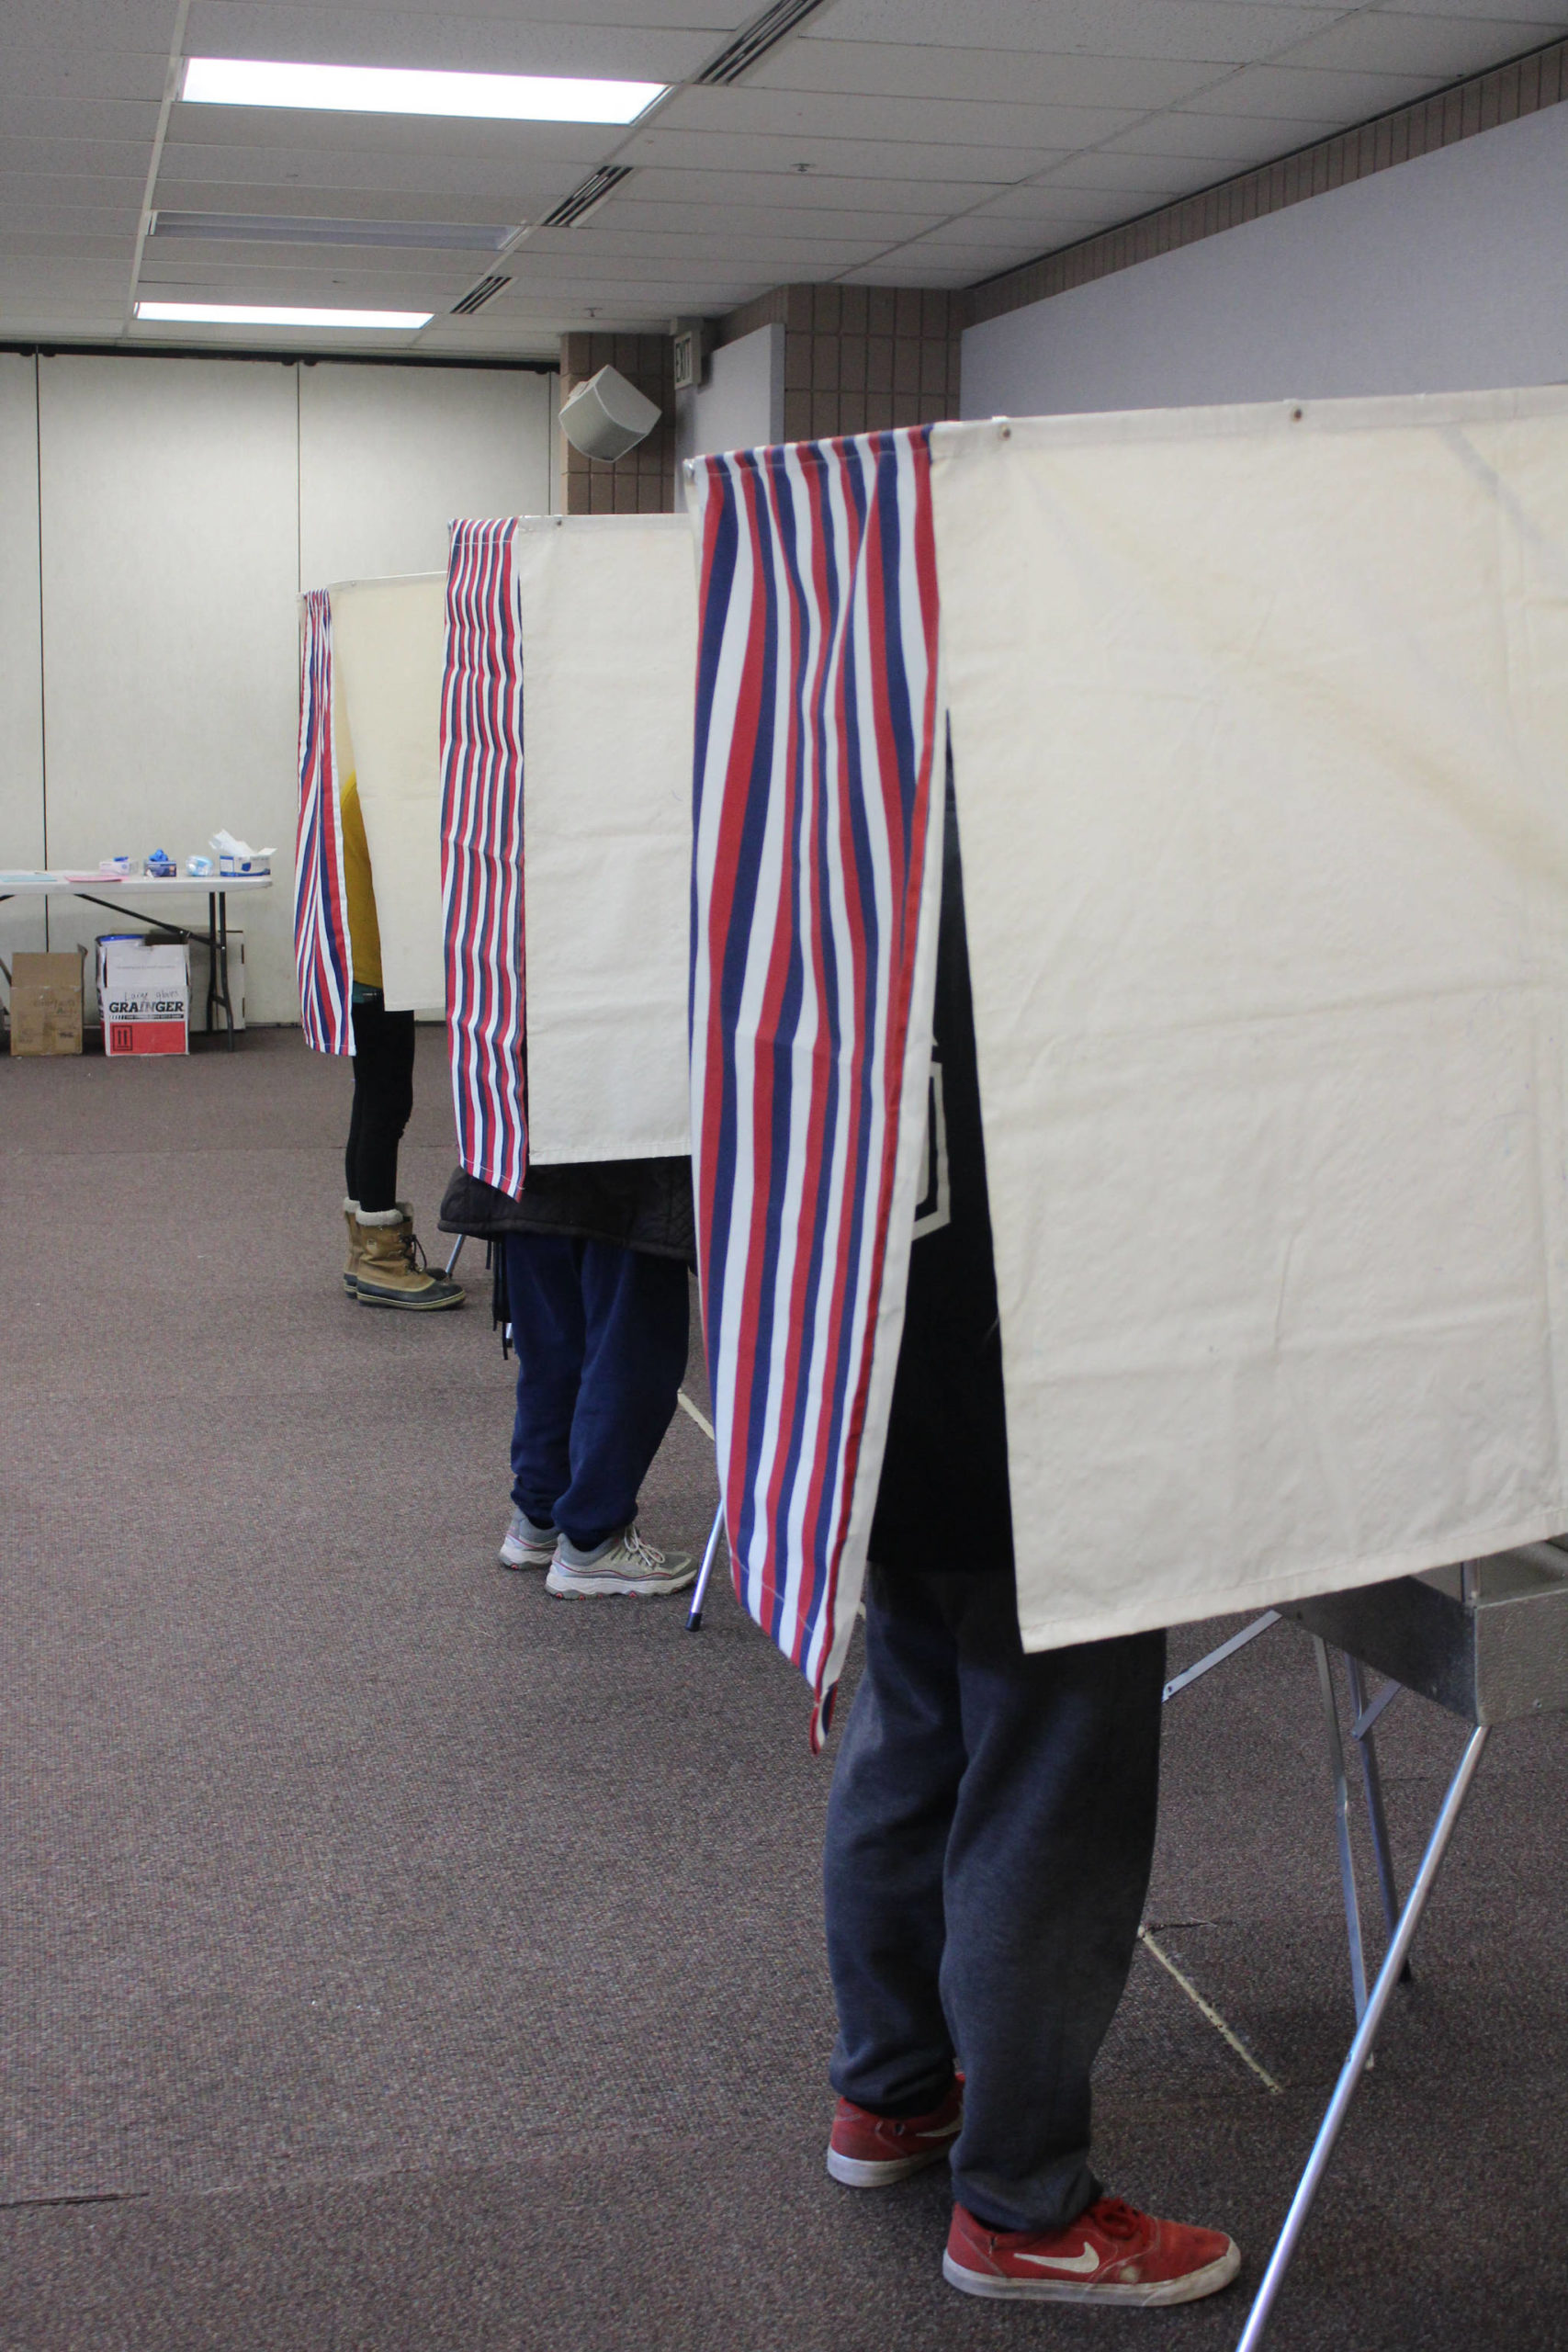 Voters fill out ballots in voting booths at the Soldotna Regional Sports Complex on Tuesday, Nov. 3 in Soldotna, Alaska. (Photo by Ashlyn O’Hara/Peninsula Clarion)